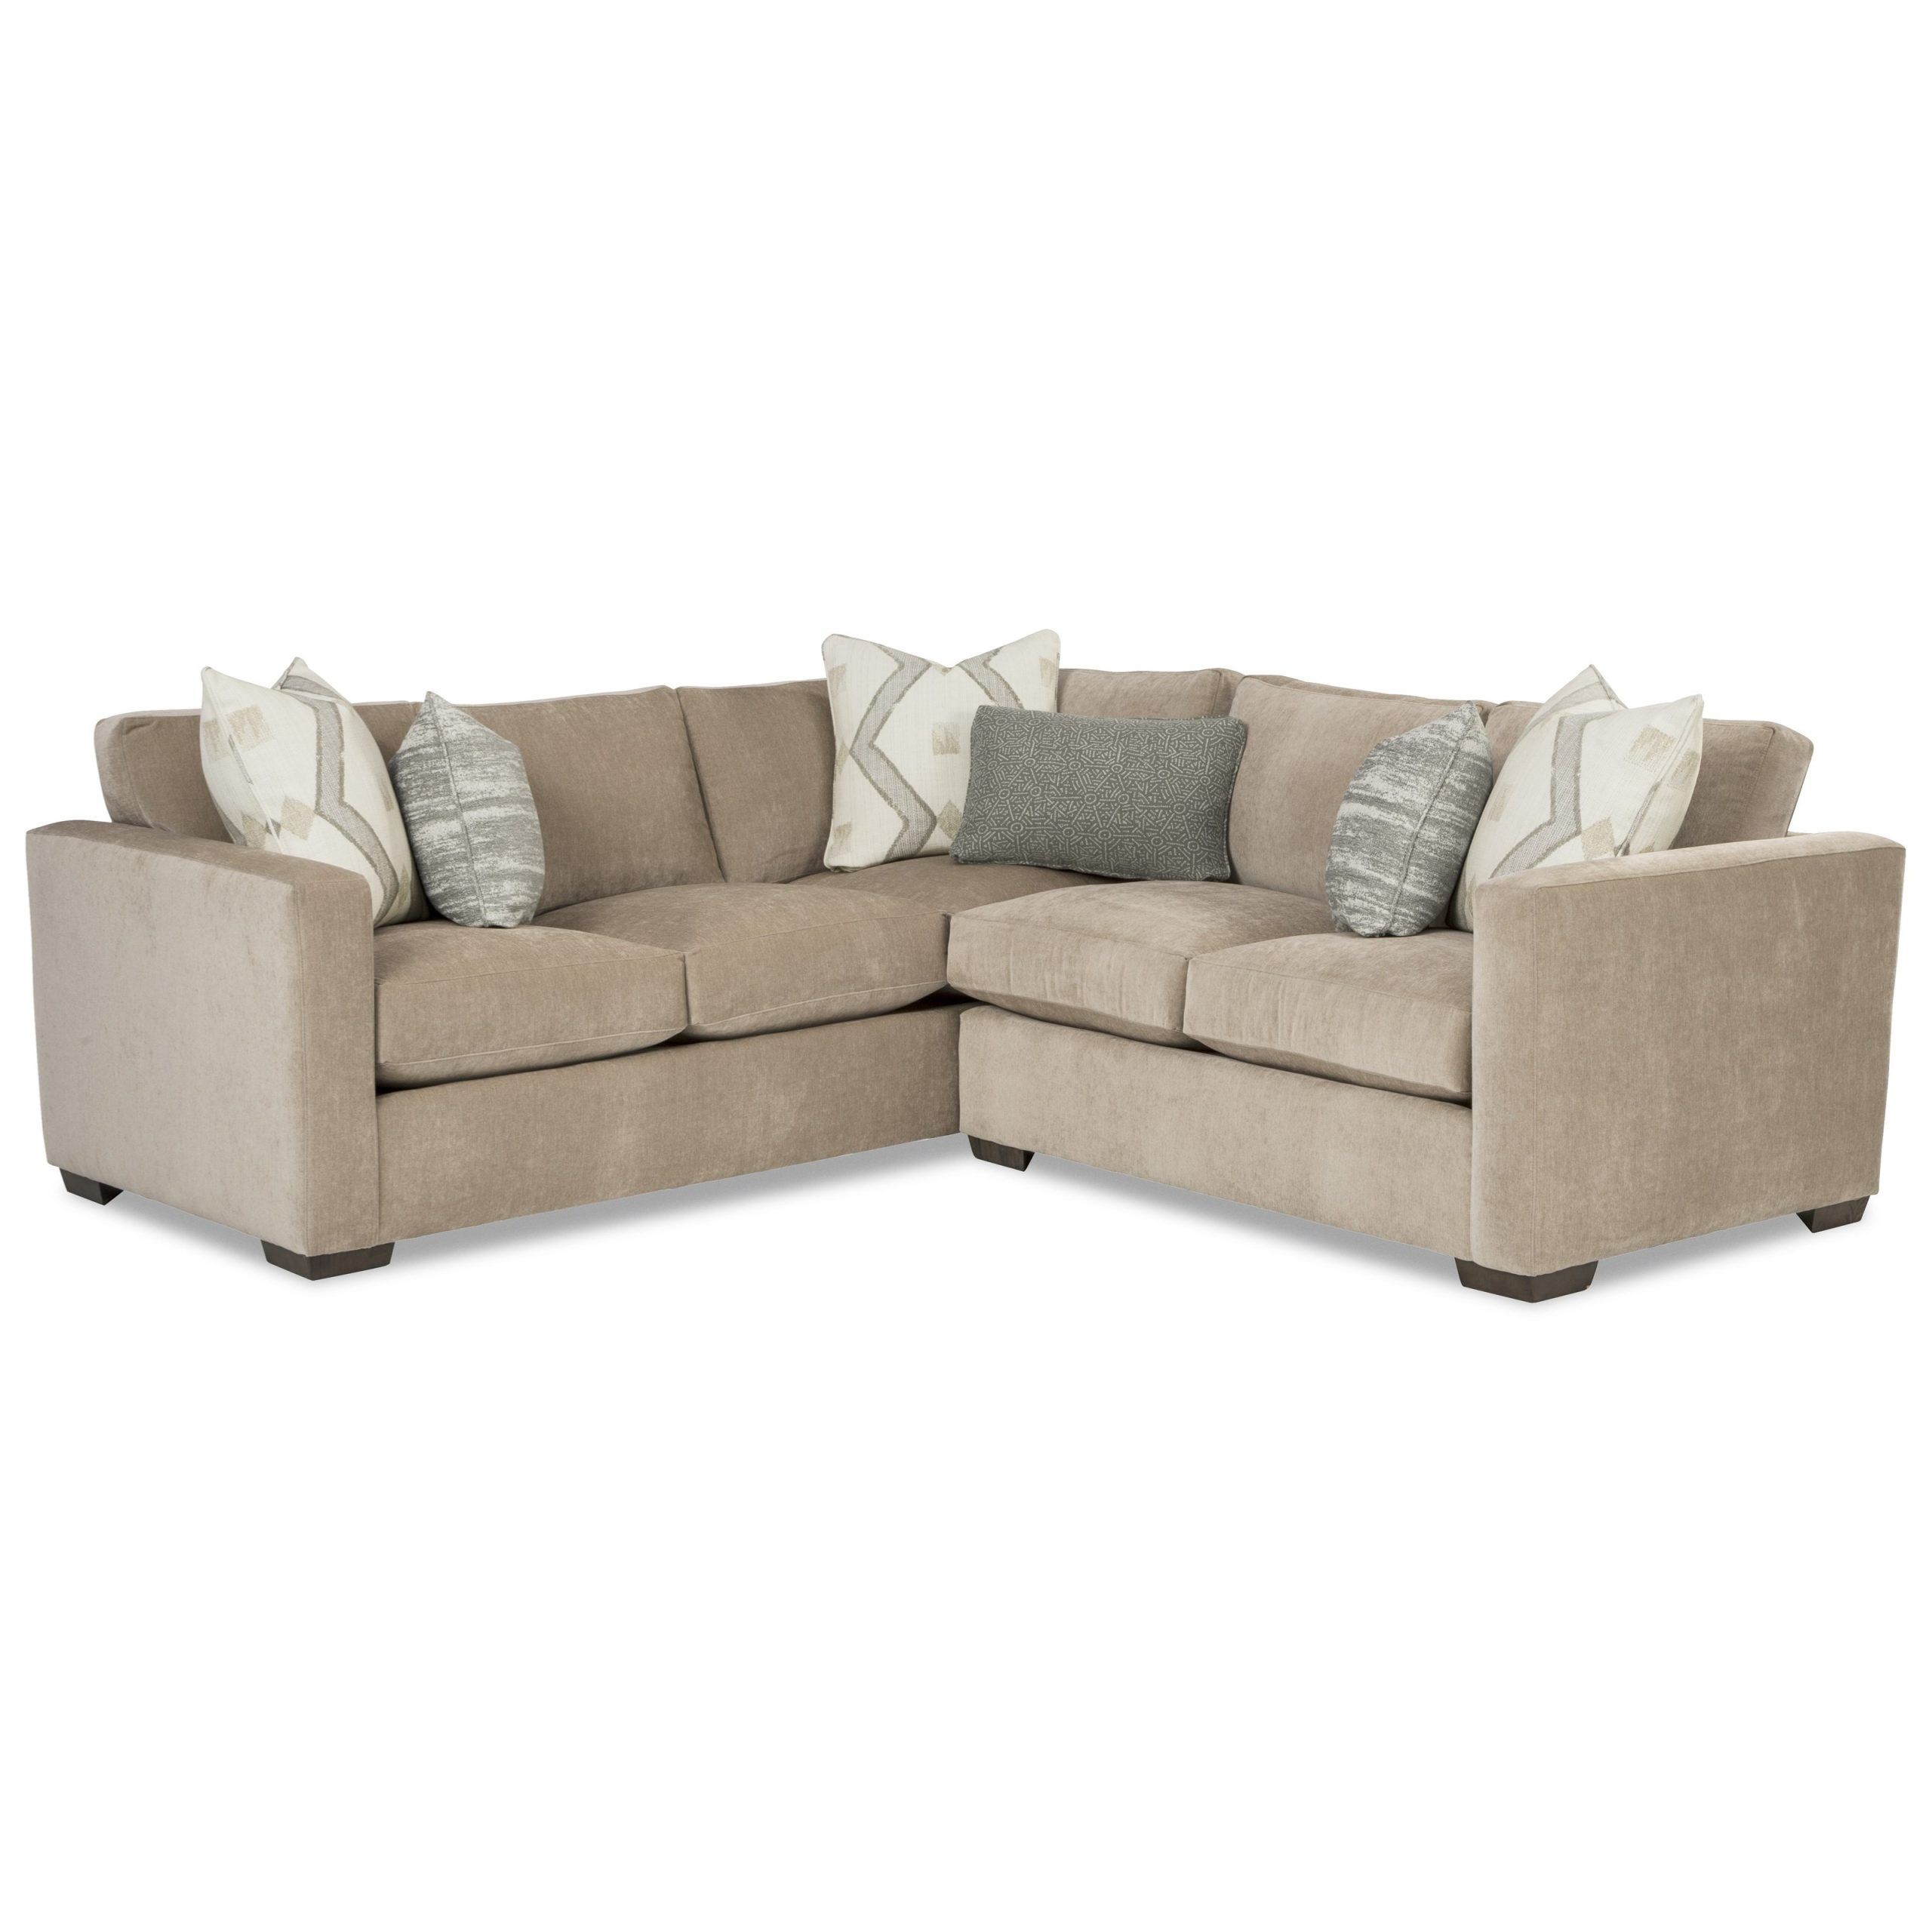 Craftmaster 792750bd Contemporary 2 Piece Sectional With Raf Corner Inside Microfiber Sectional Corner Sofas (View 12 of 20)